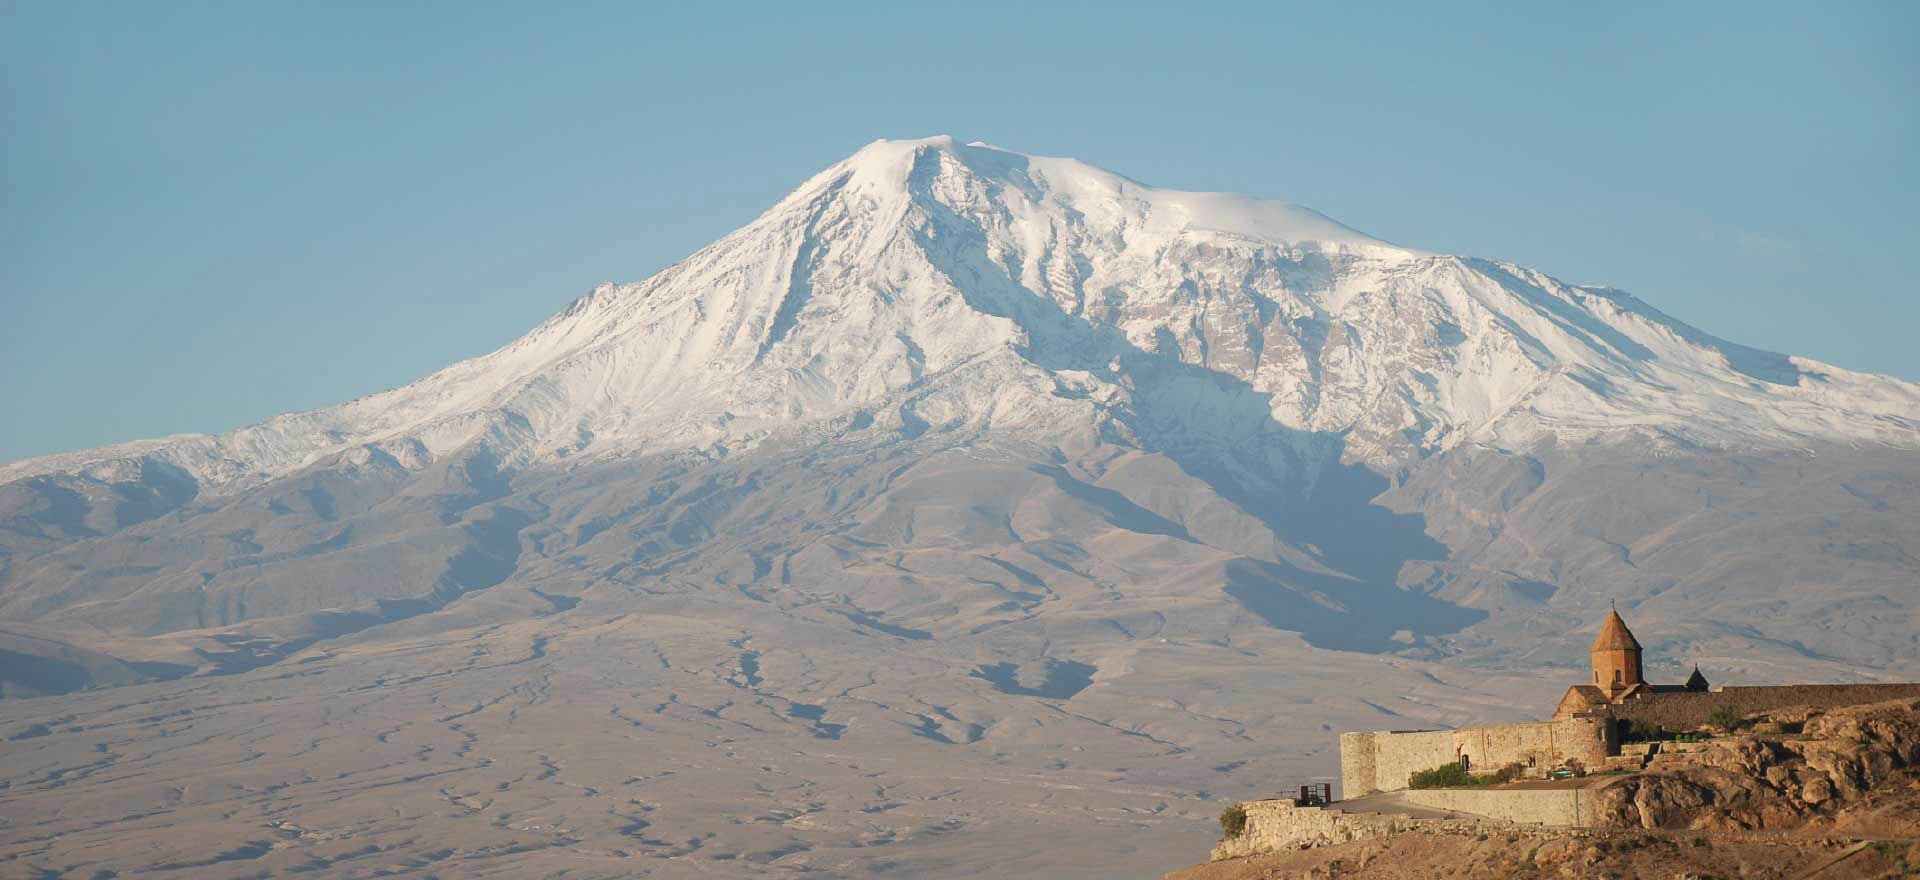 View of Mt Ararat with Khor Virap in foreground - Armenia tours and holidays